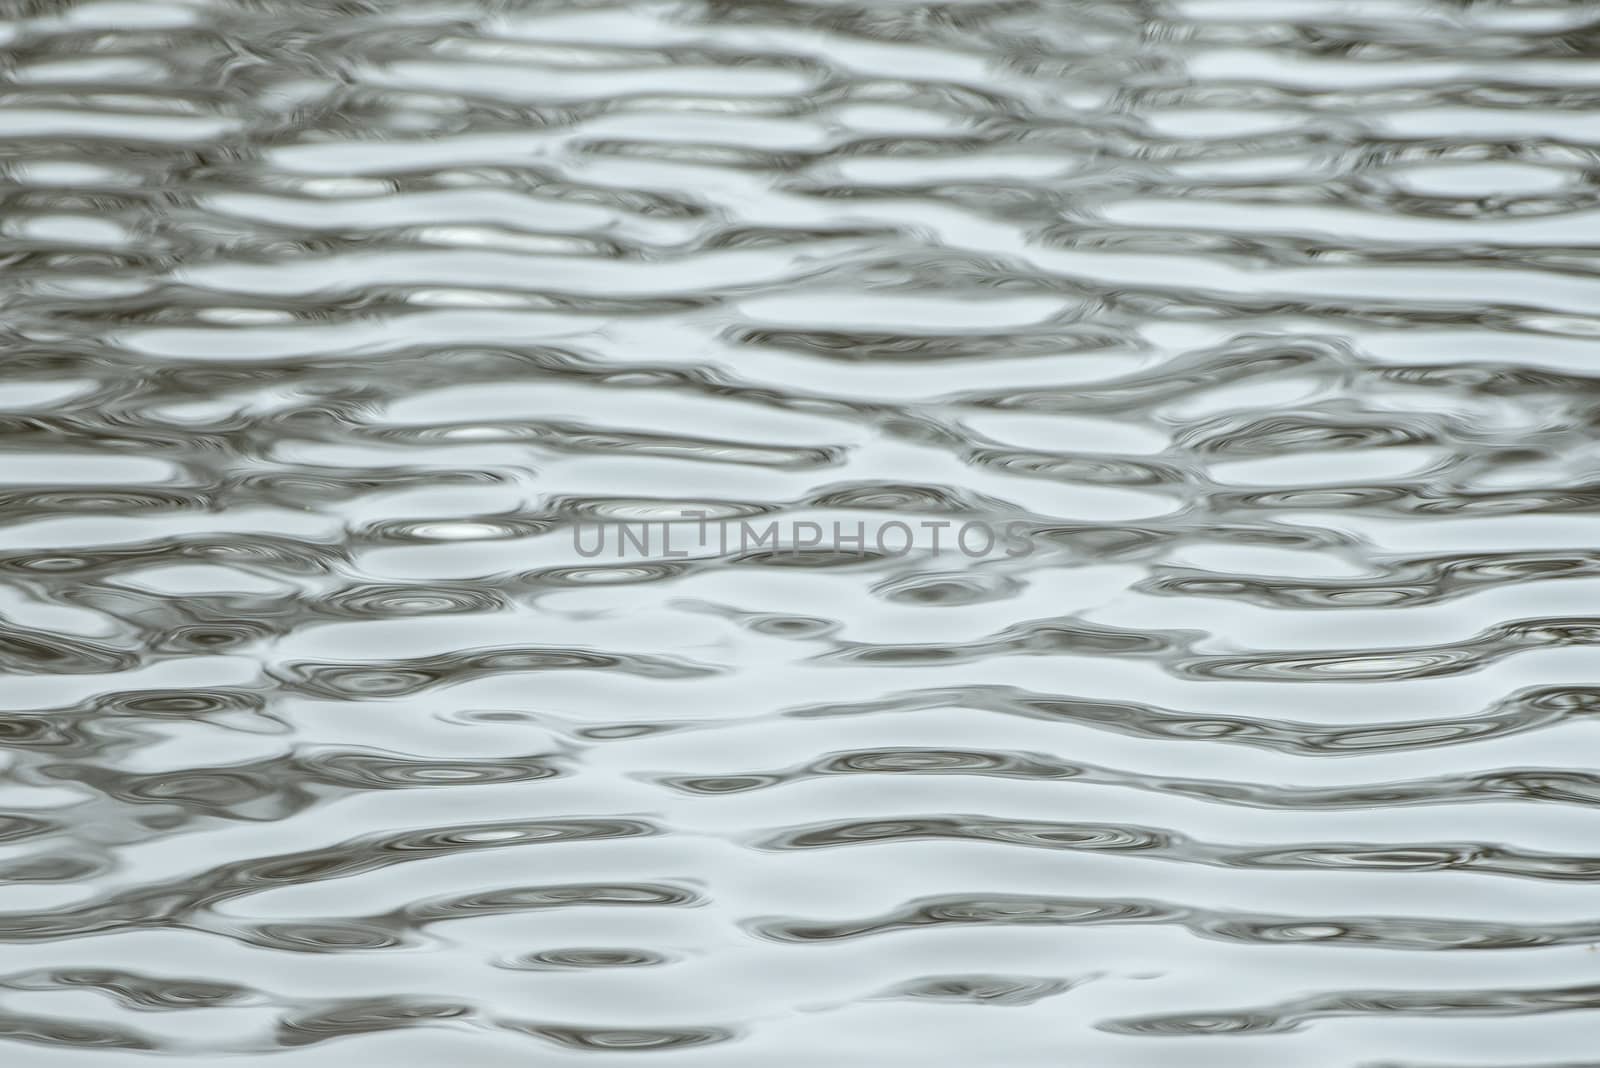 Ripple in water surface by Tofotografie